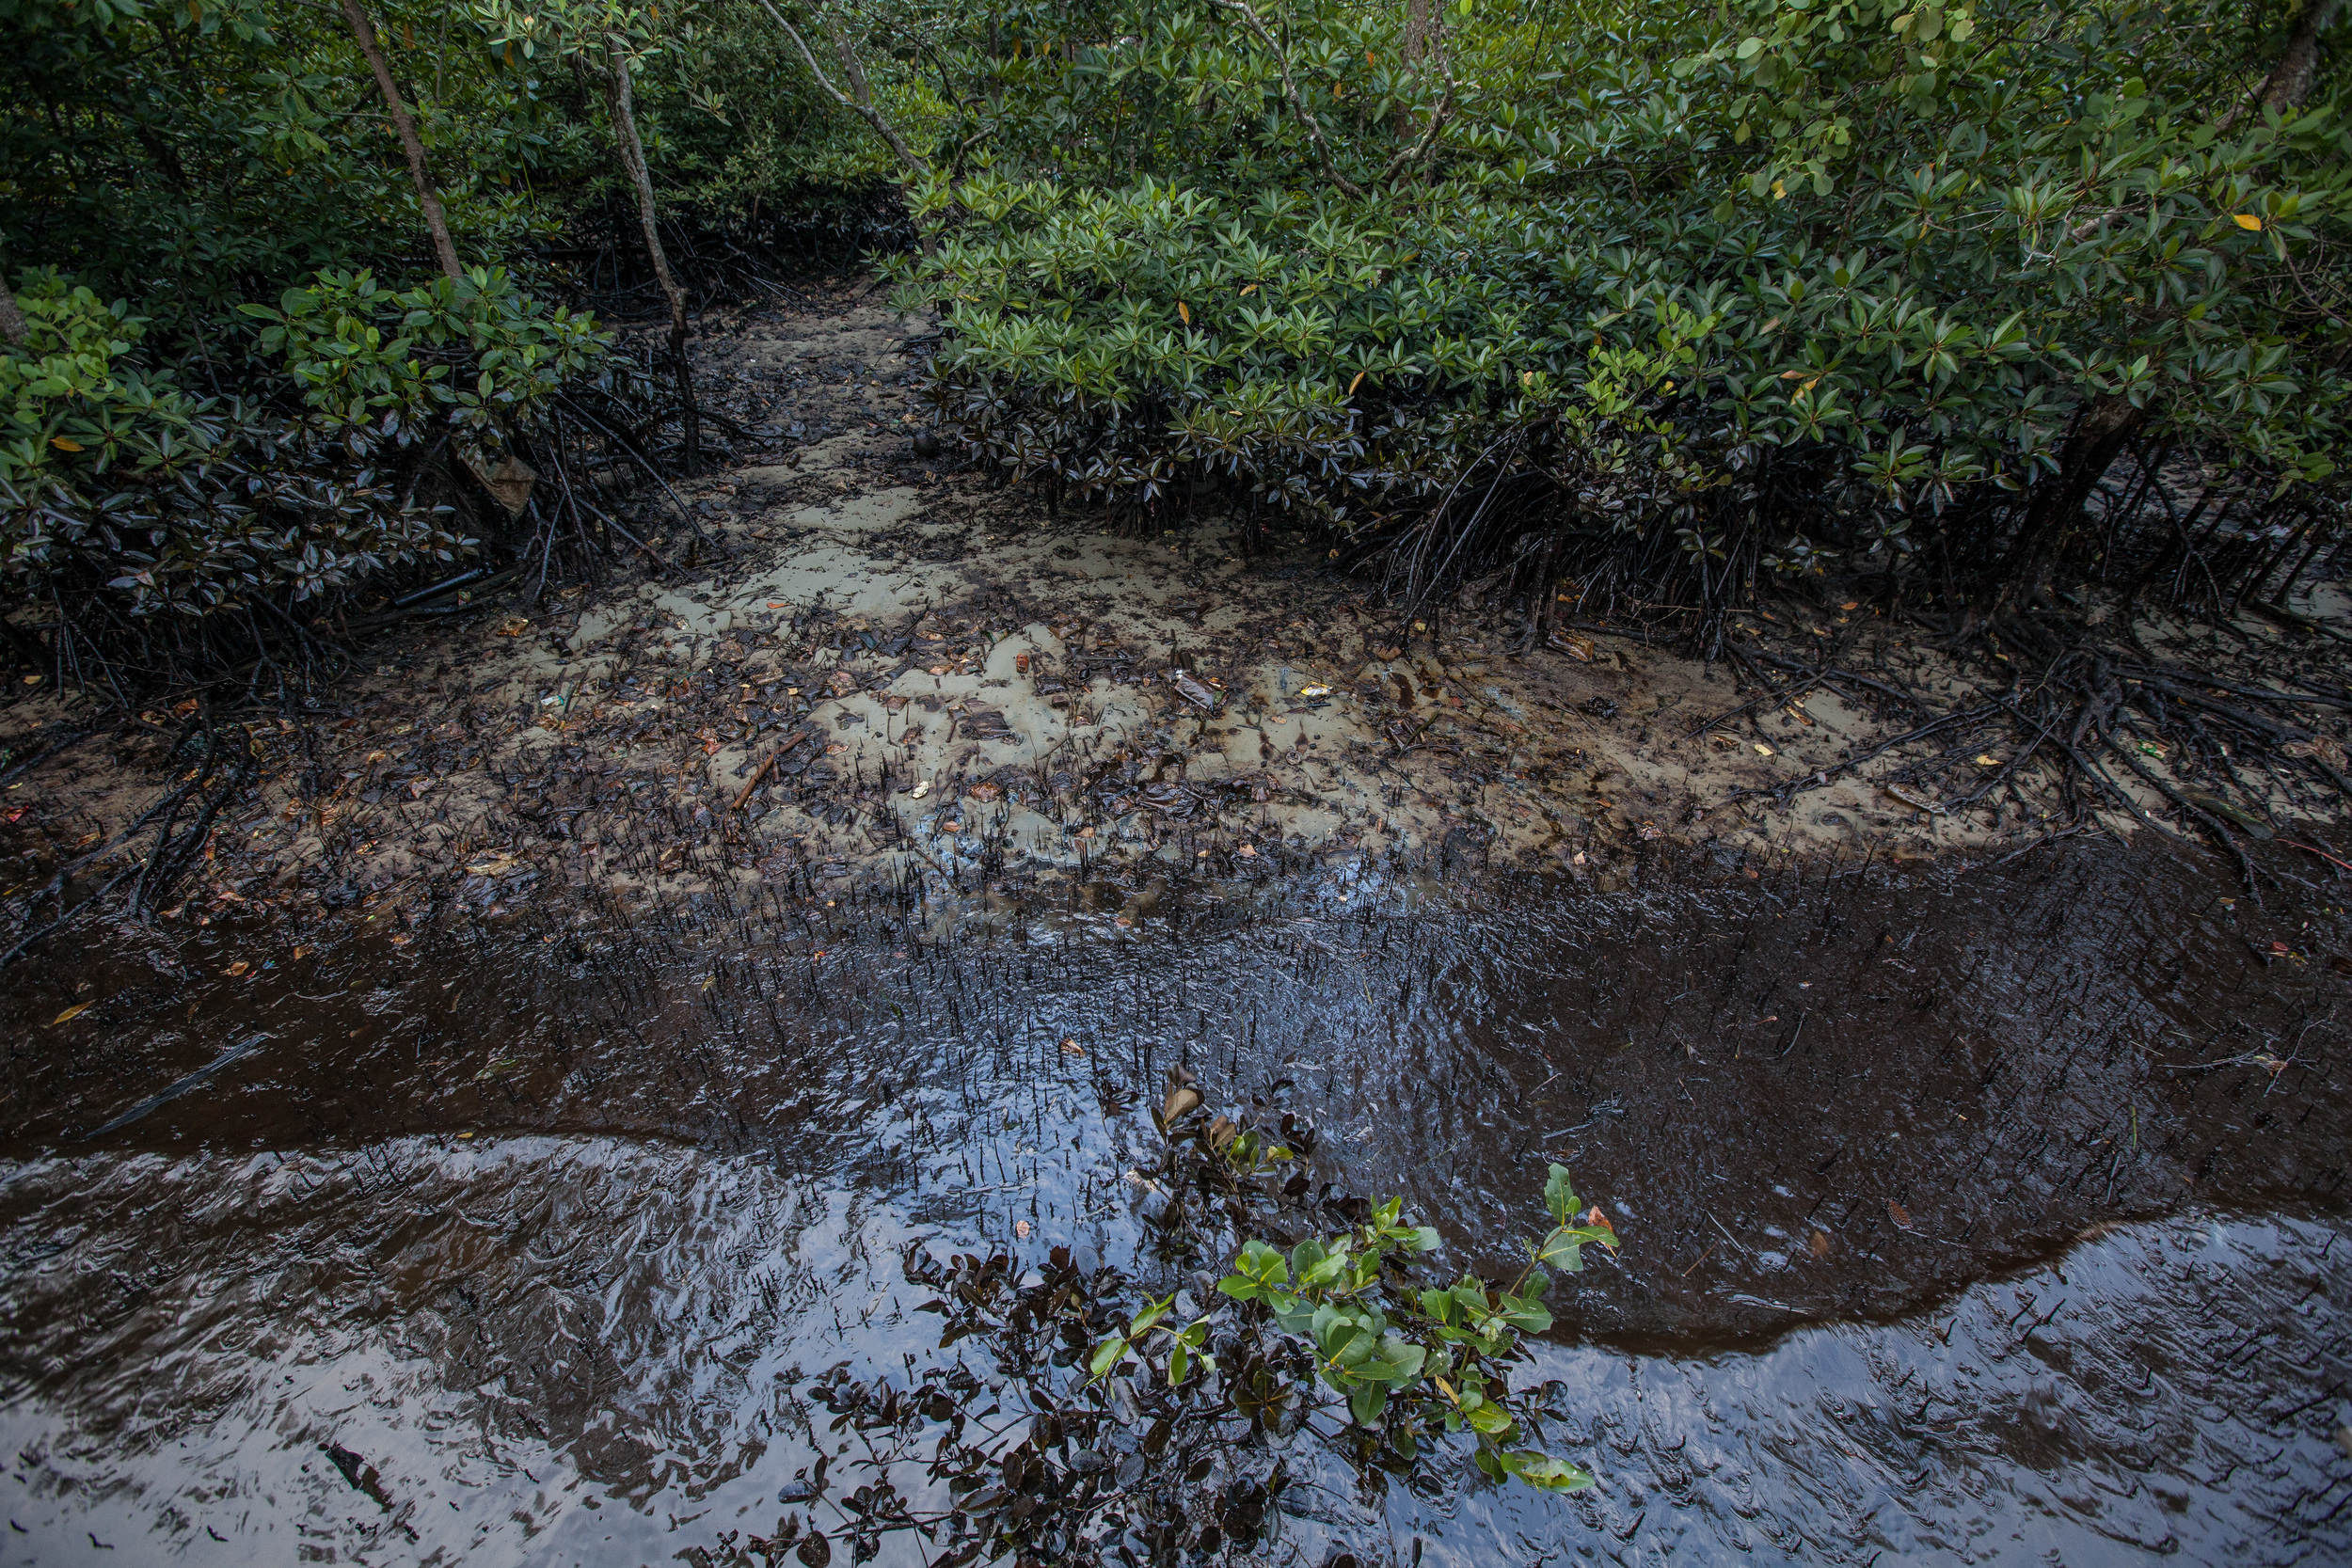 Mangrove contaminated by an oil spill